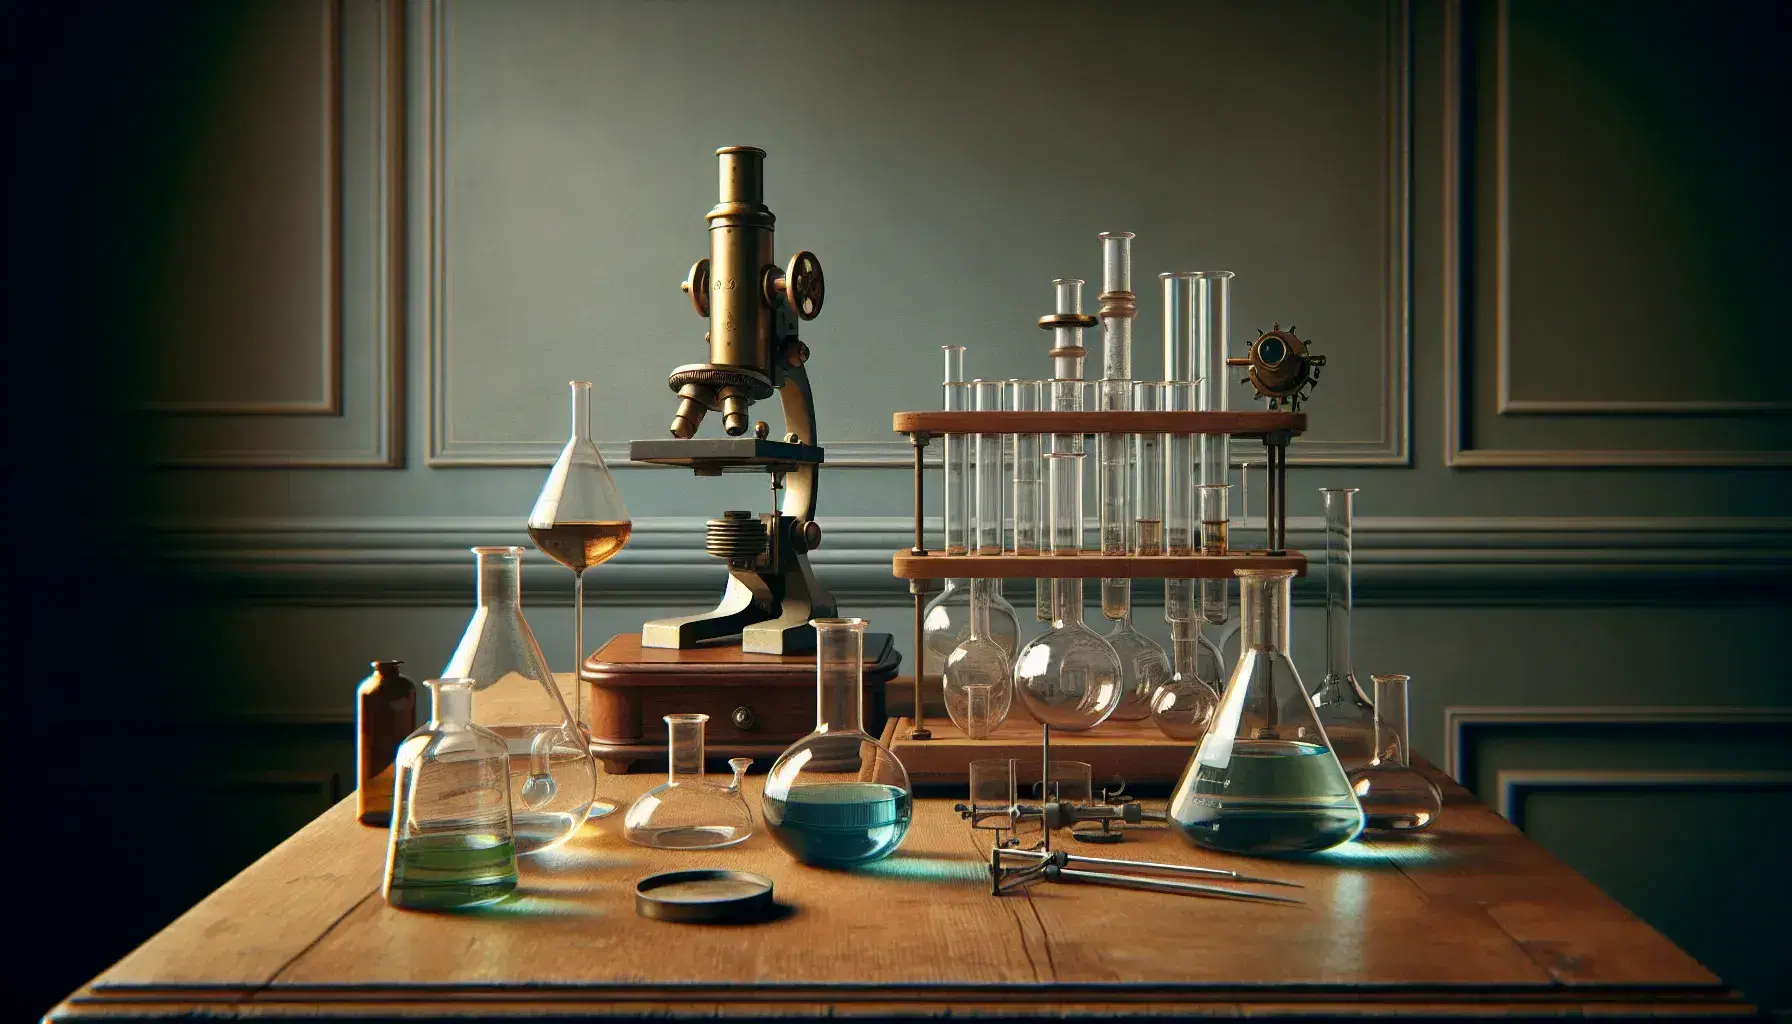 Historic science laboratory with clear glassware, defocused brass microscope and Bunsen burner, soft natural lighting.